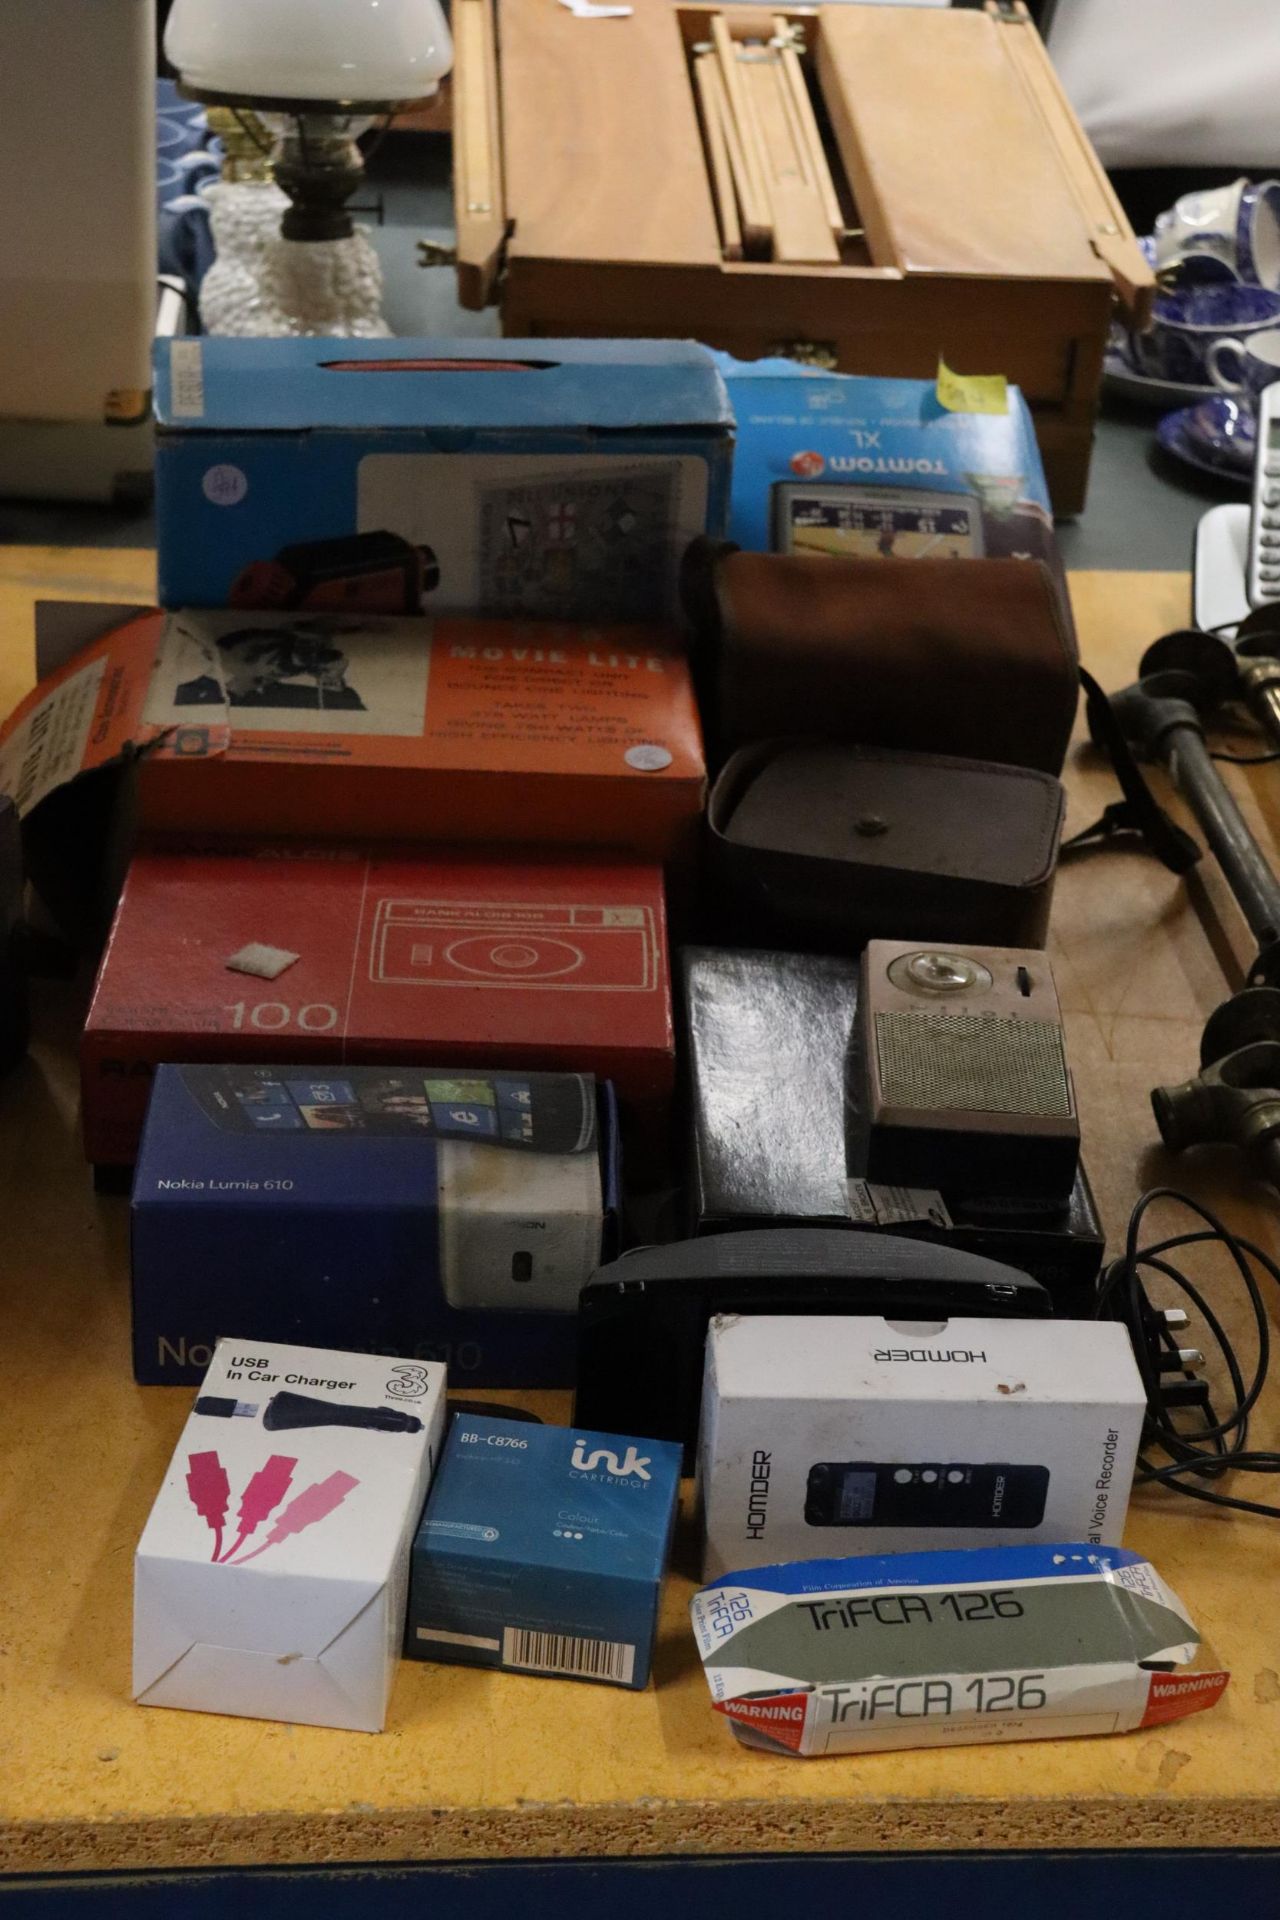 A MIXED LOT TO INCLUDE A TOMTOM, NOKIA LUMIA 610 CAMERA, A MOVIE LITE, SAMSUNG PHONE, ETC., - Image 2 of 14